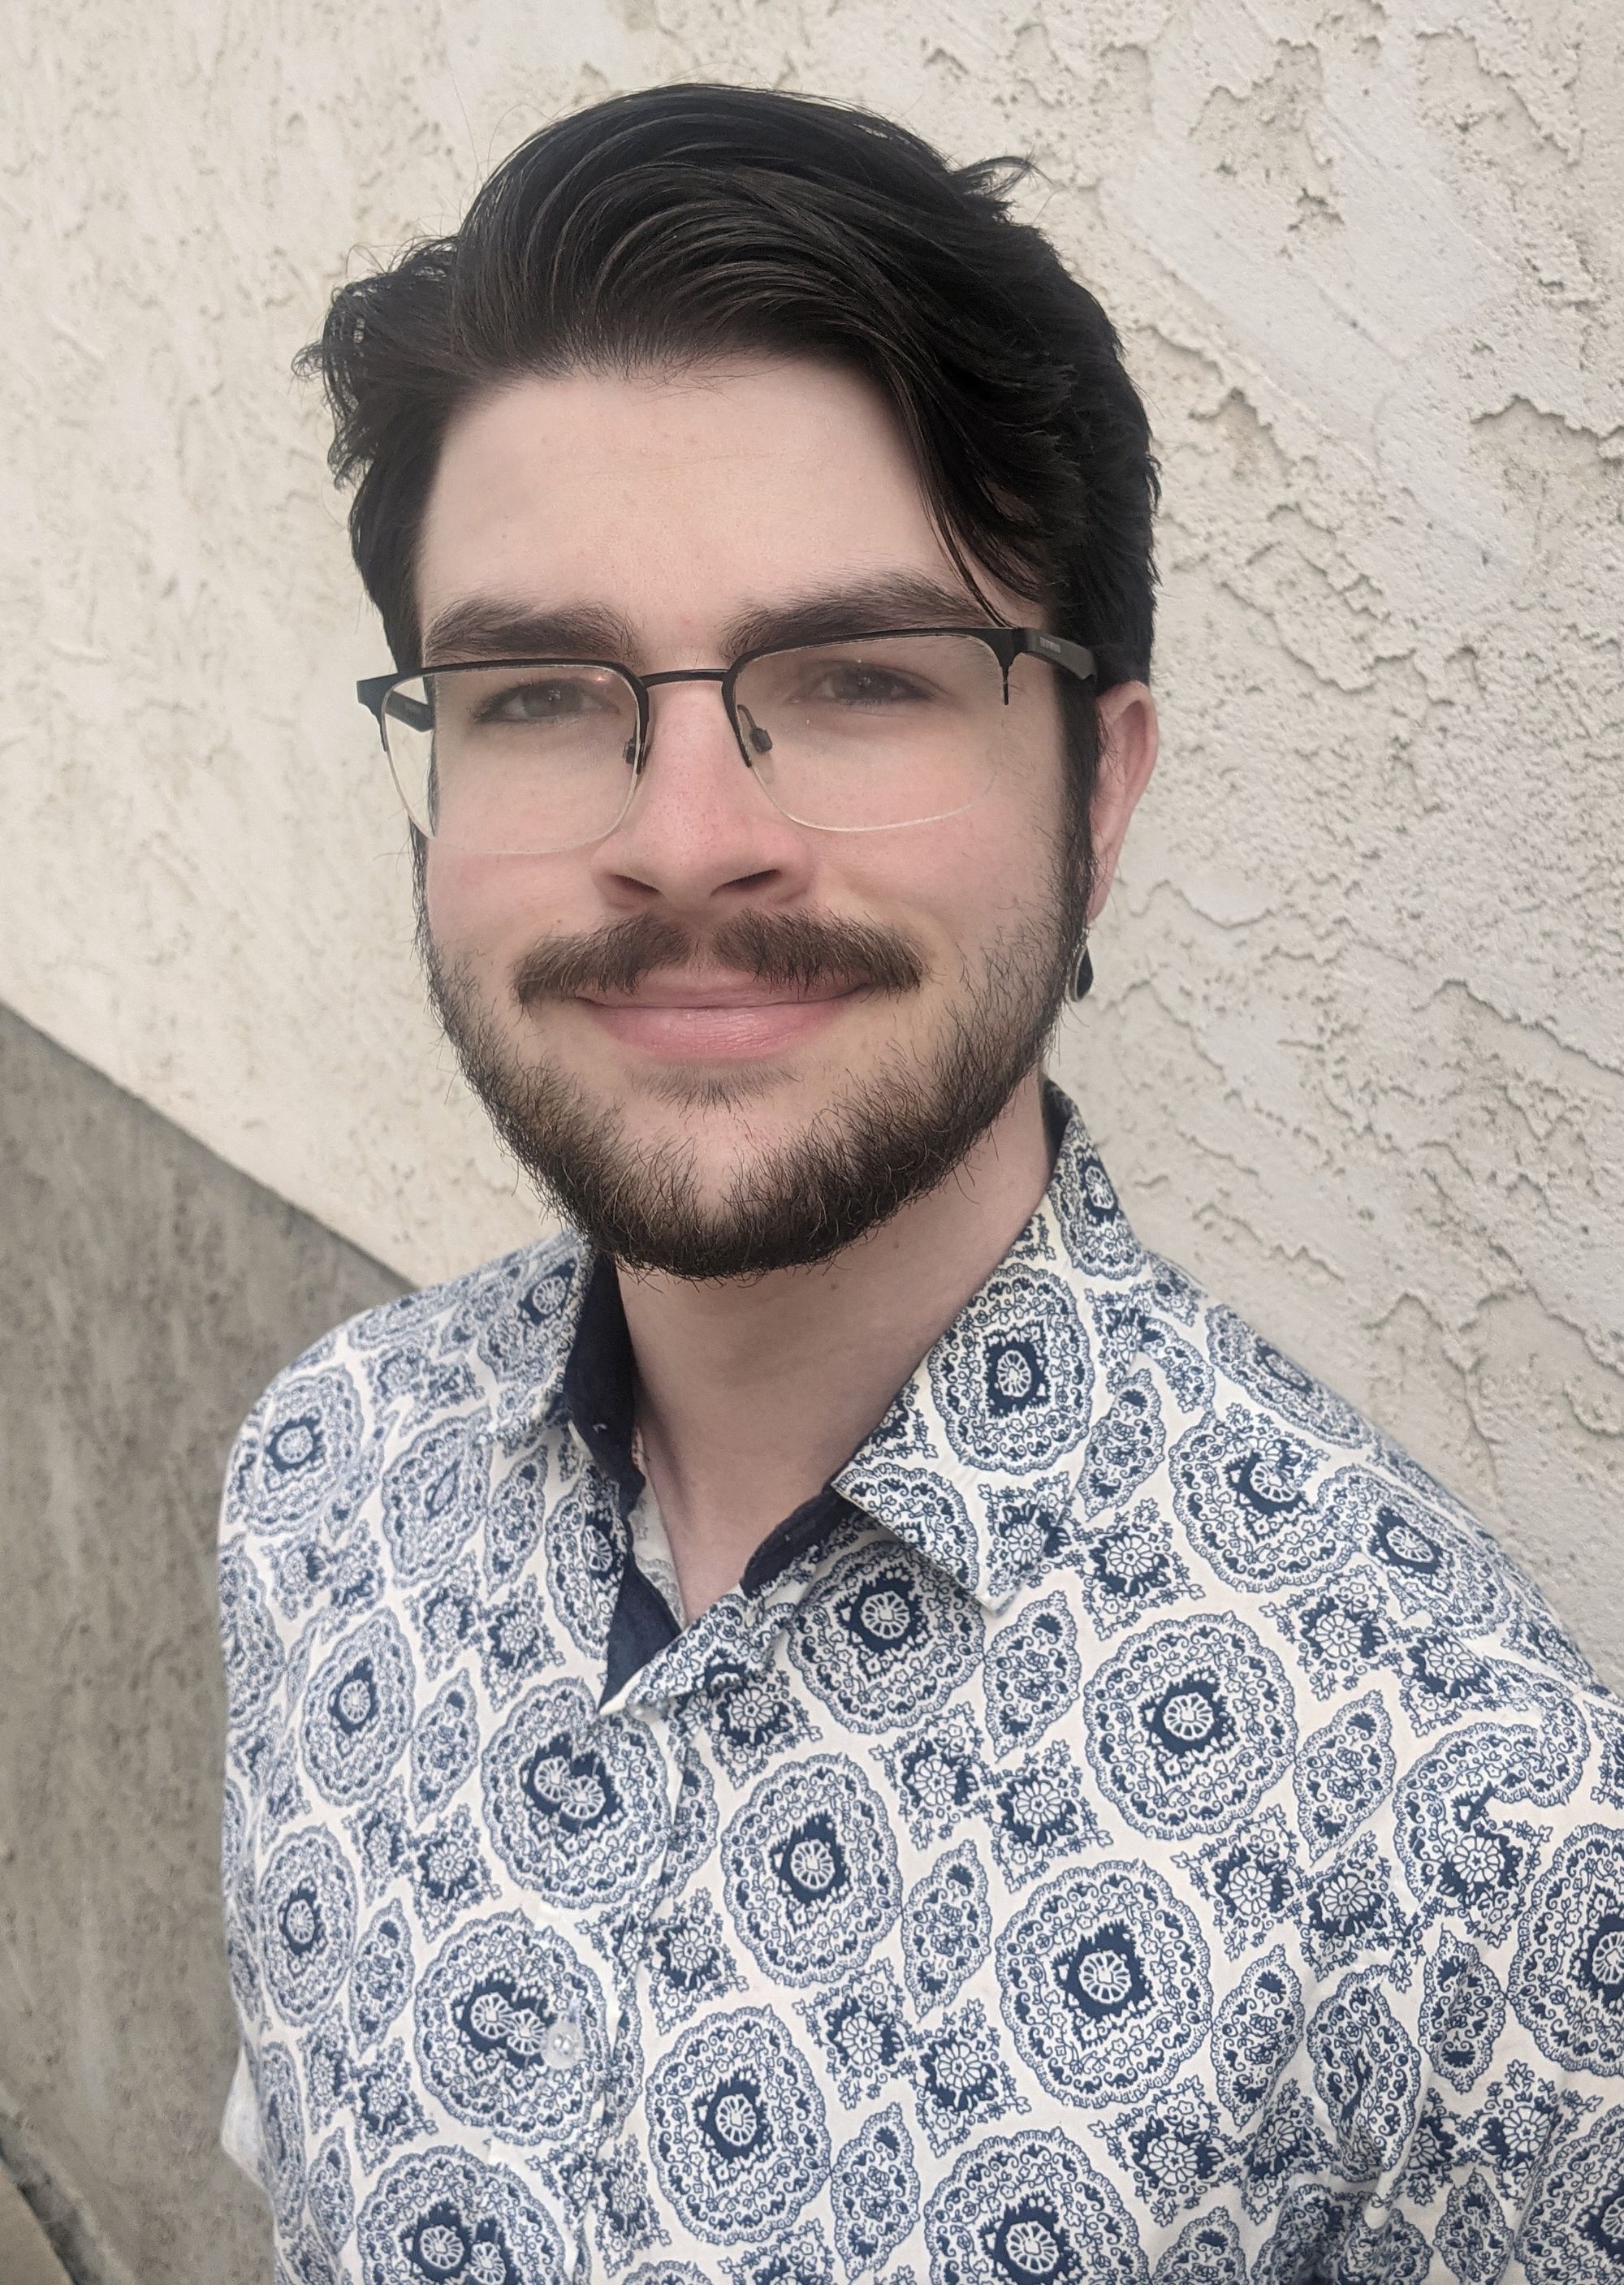 A portrait of a young man with glasses, short black hair, and a beard. He is wearing a blue paisley button up shirt.